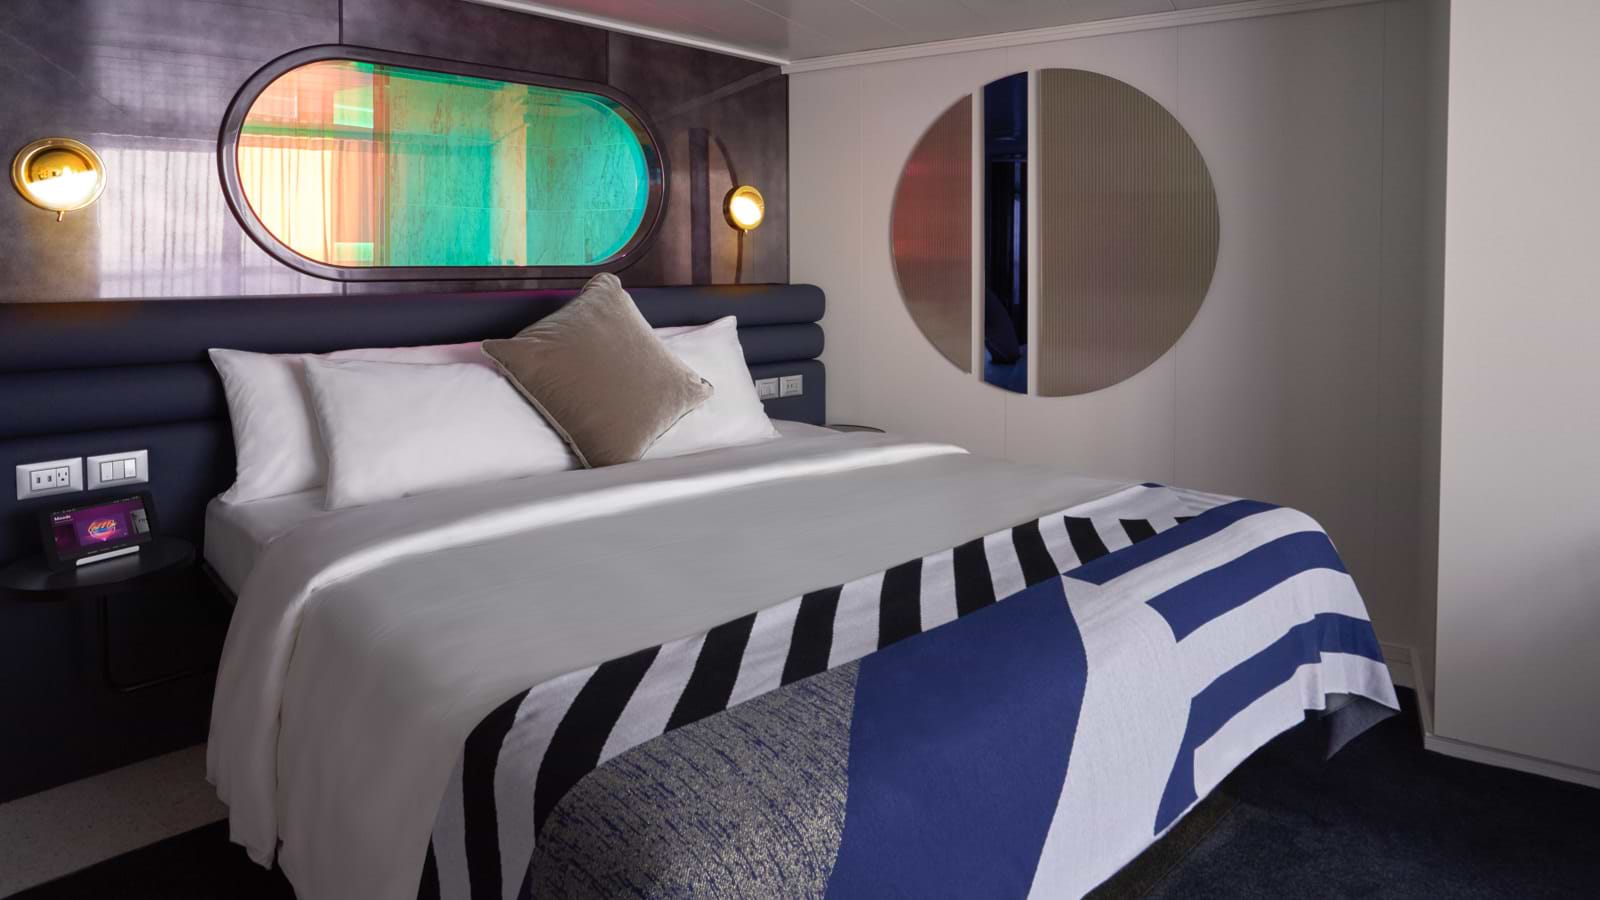 Virgin Voyages’ Seriously Suite view of bed with striped sheets, peek-a-boo shower window above and round mirror on the wall